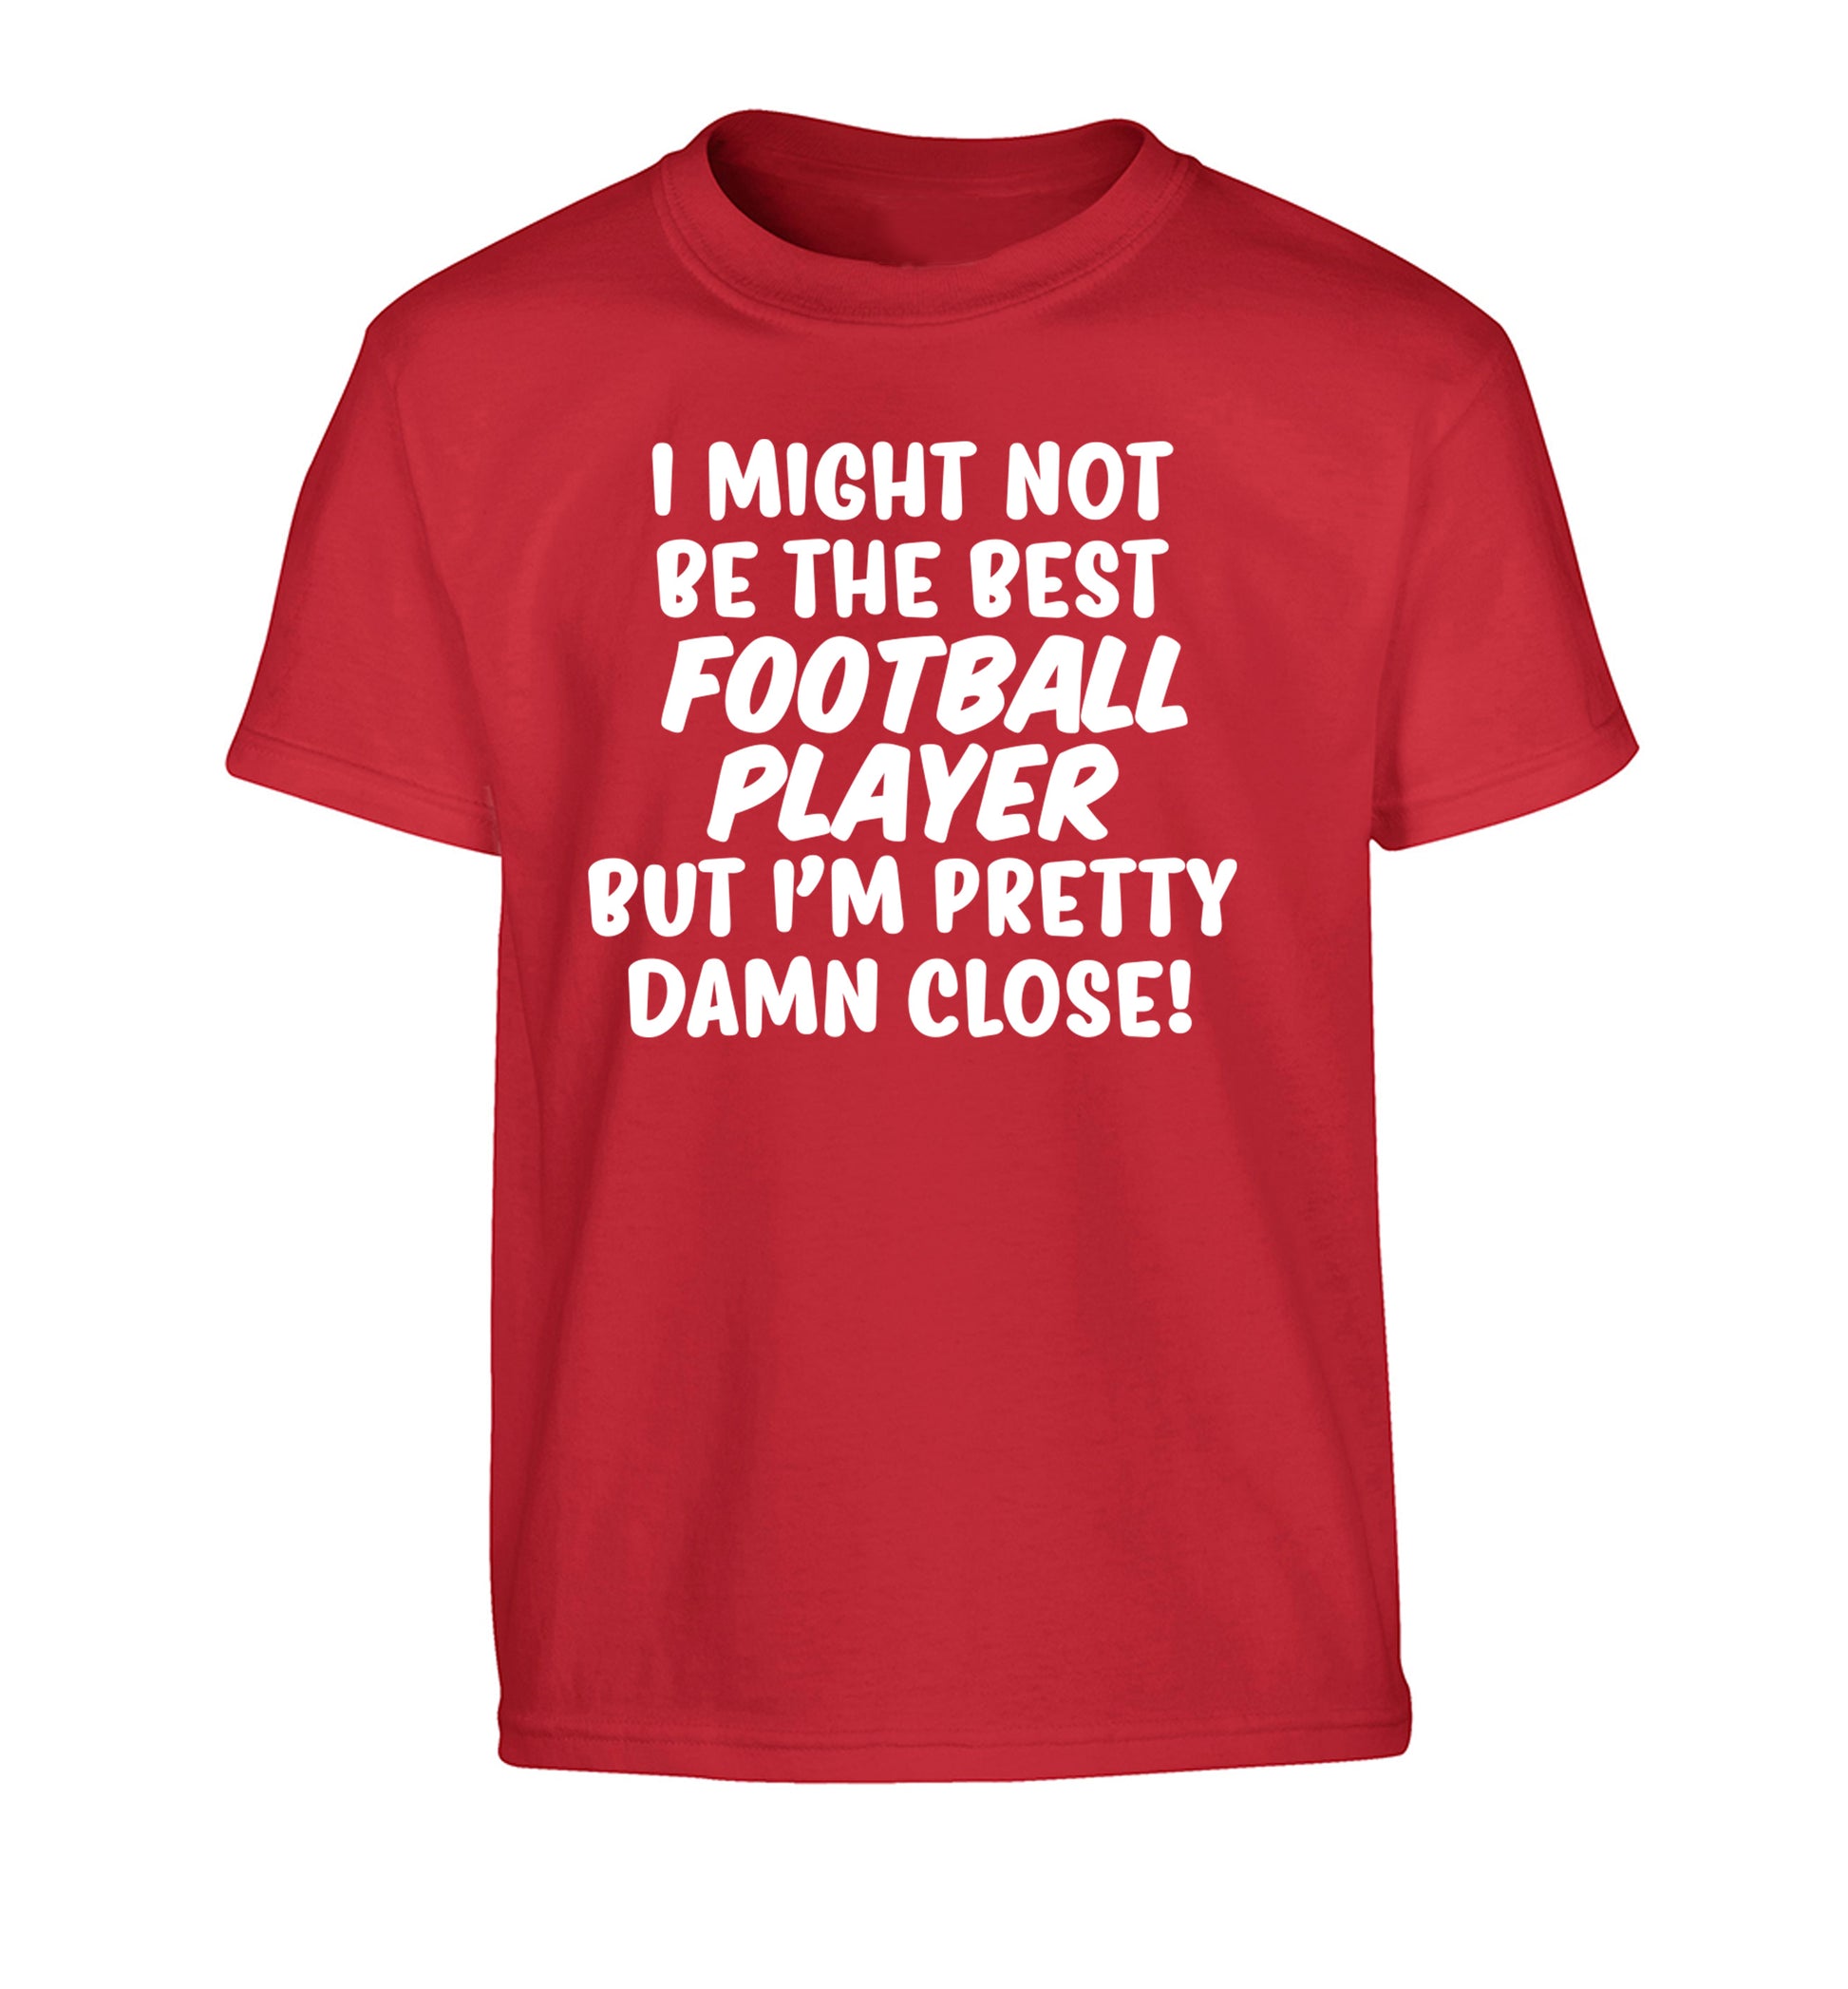 I might not be the best football player but I'm pretty close! Children's red Tshirt 12-14 Years